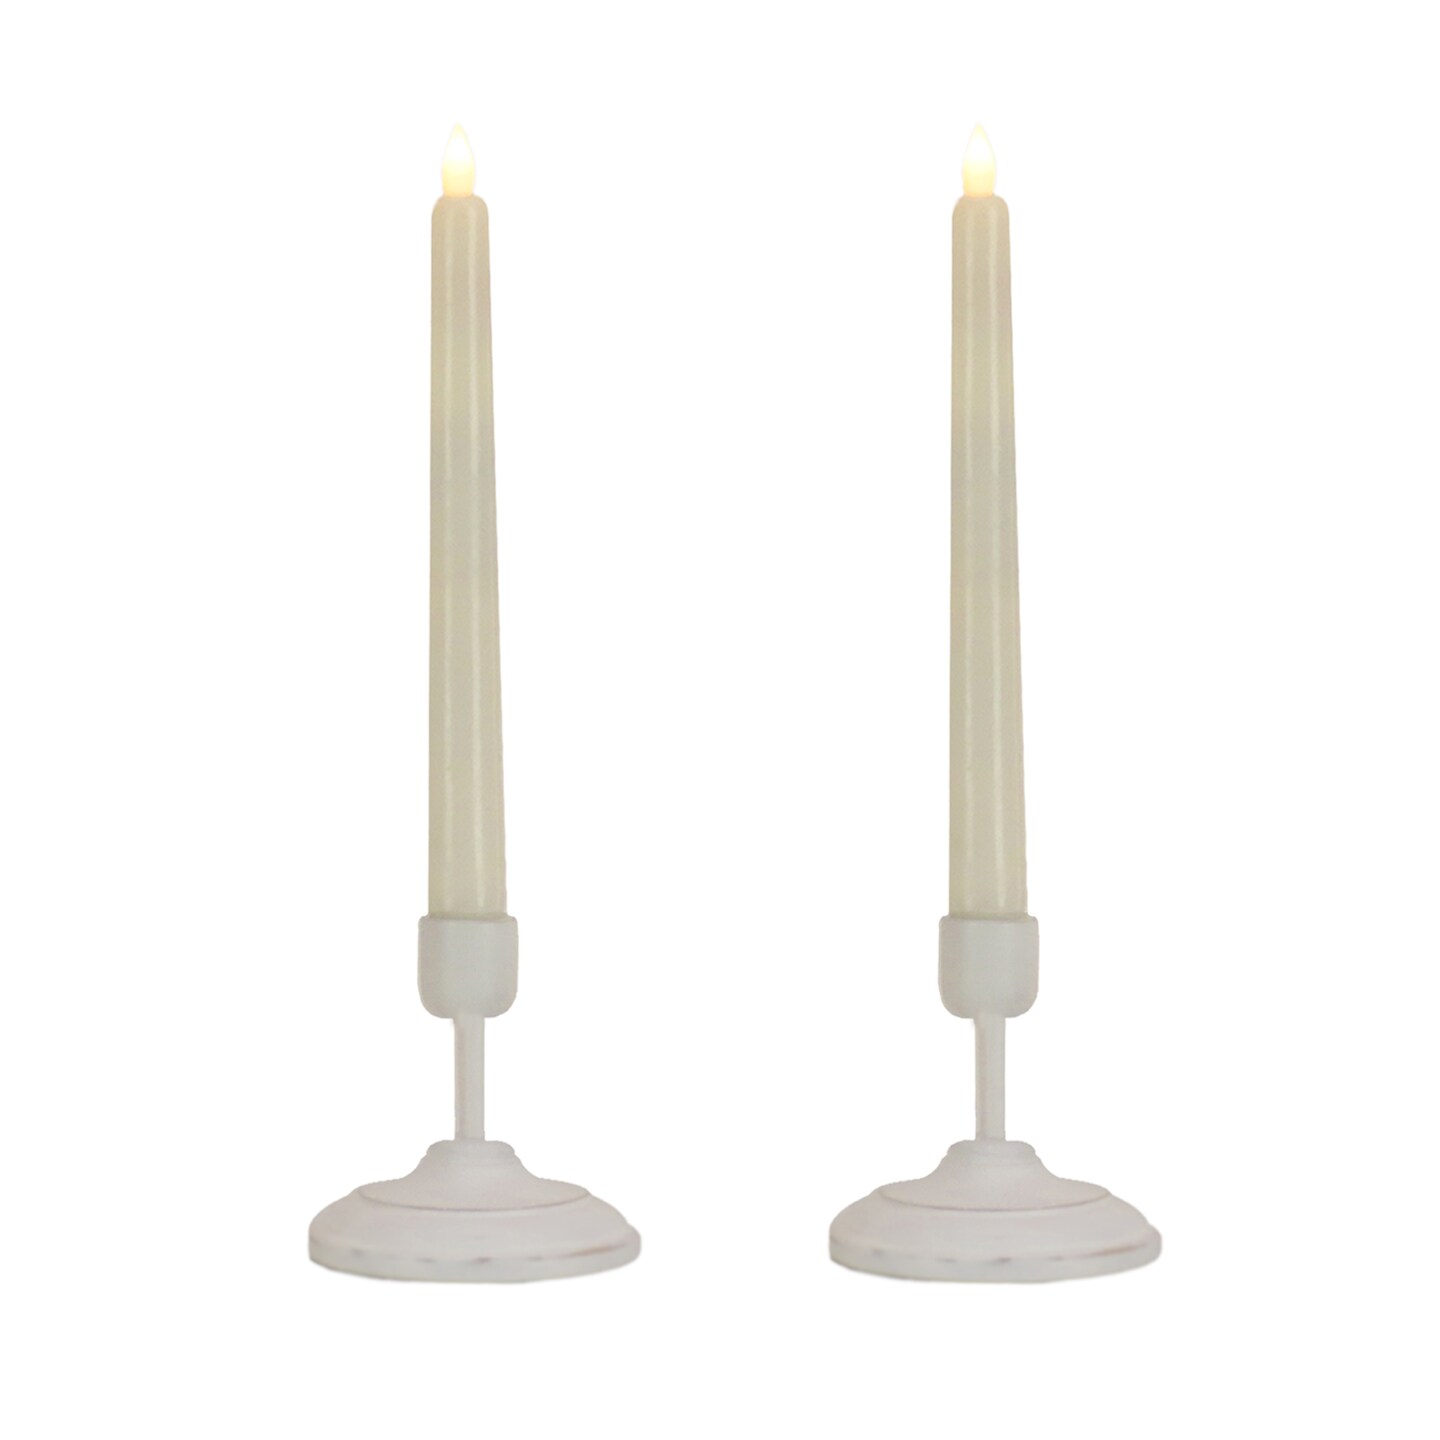 HGTV Home Collection Pre-Lit Set of 2 Heritage Flameless LED Window Candles with Remote, White, Battery Powered, 12 in